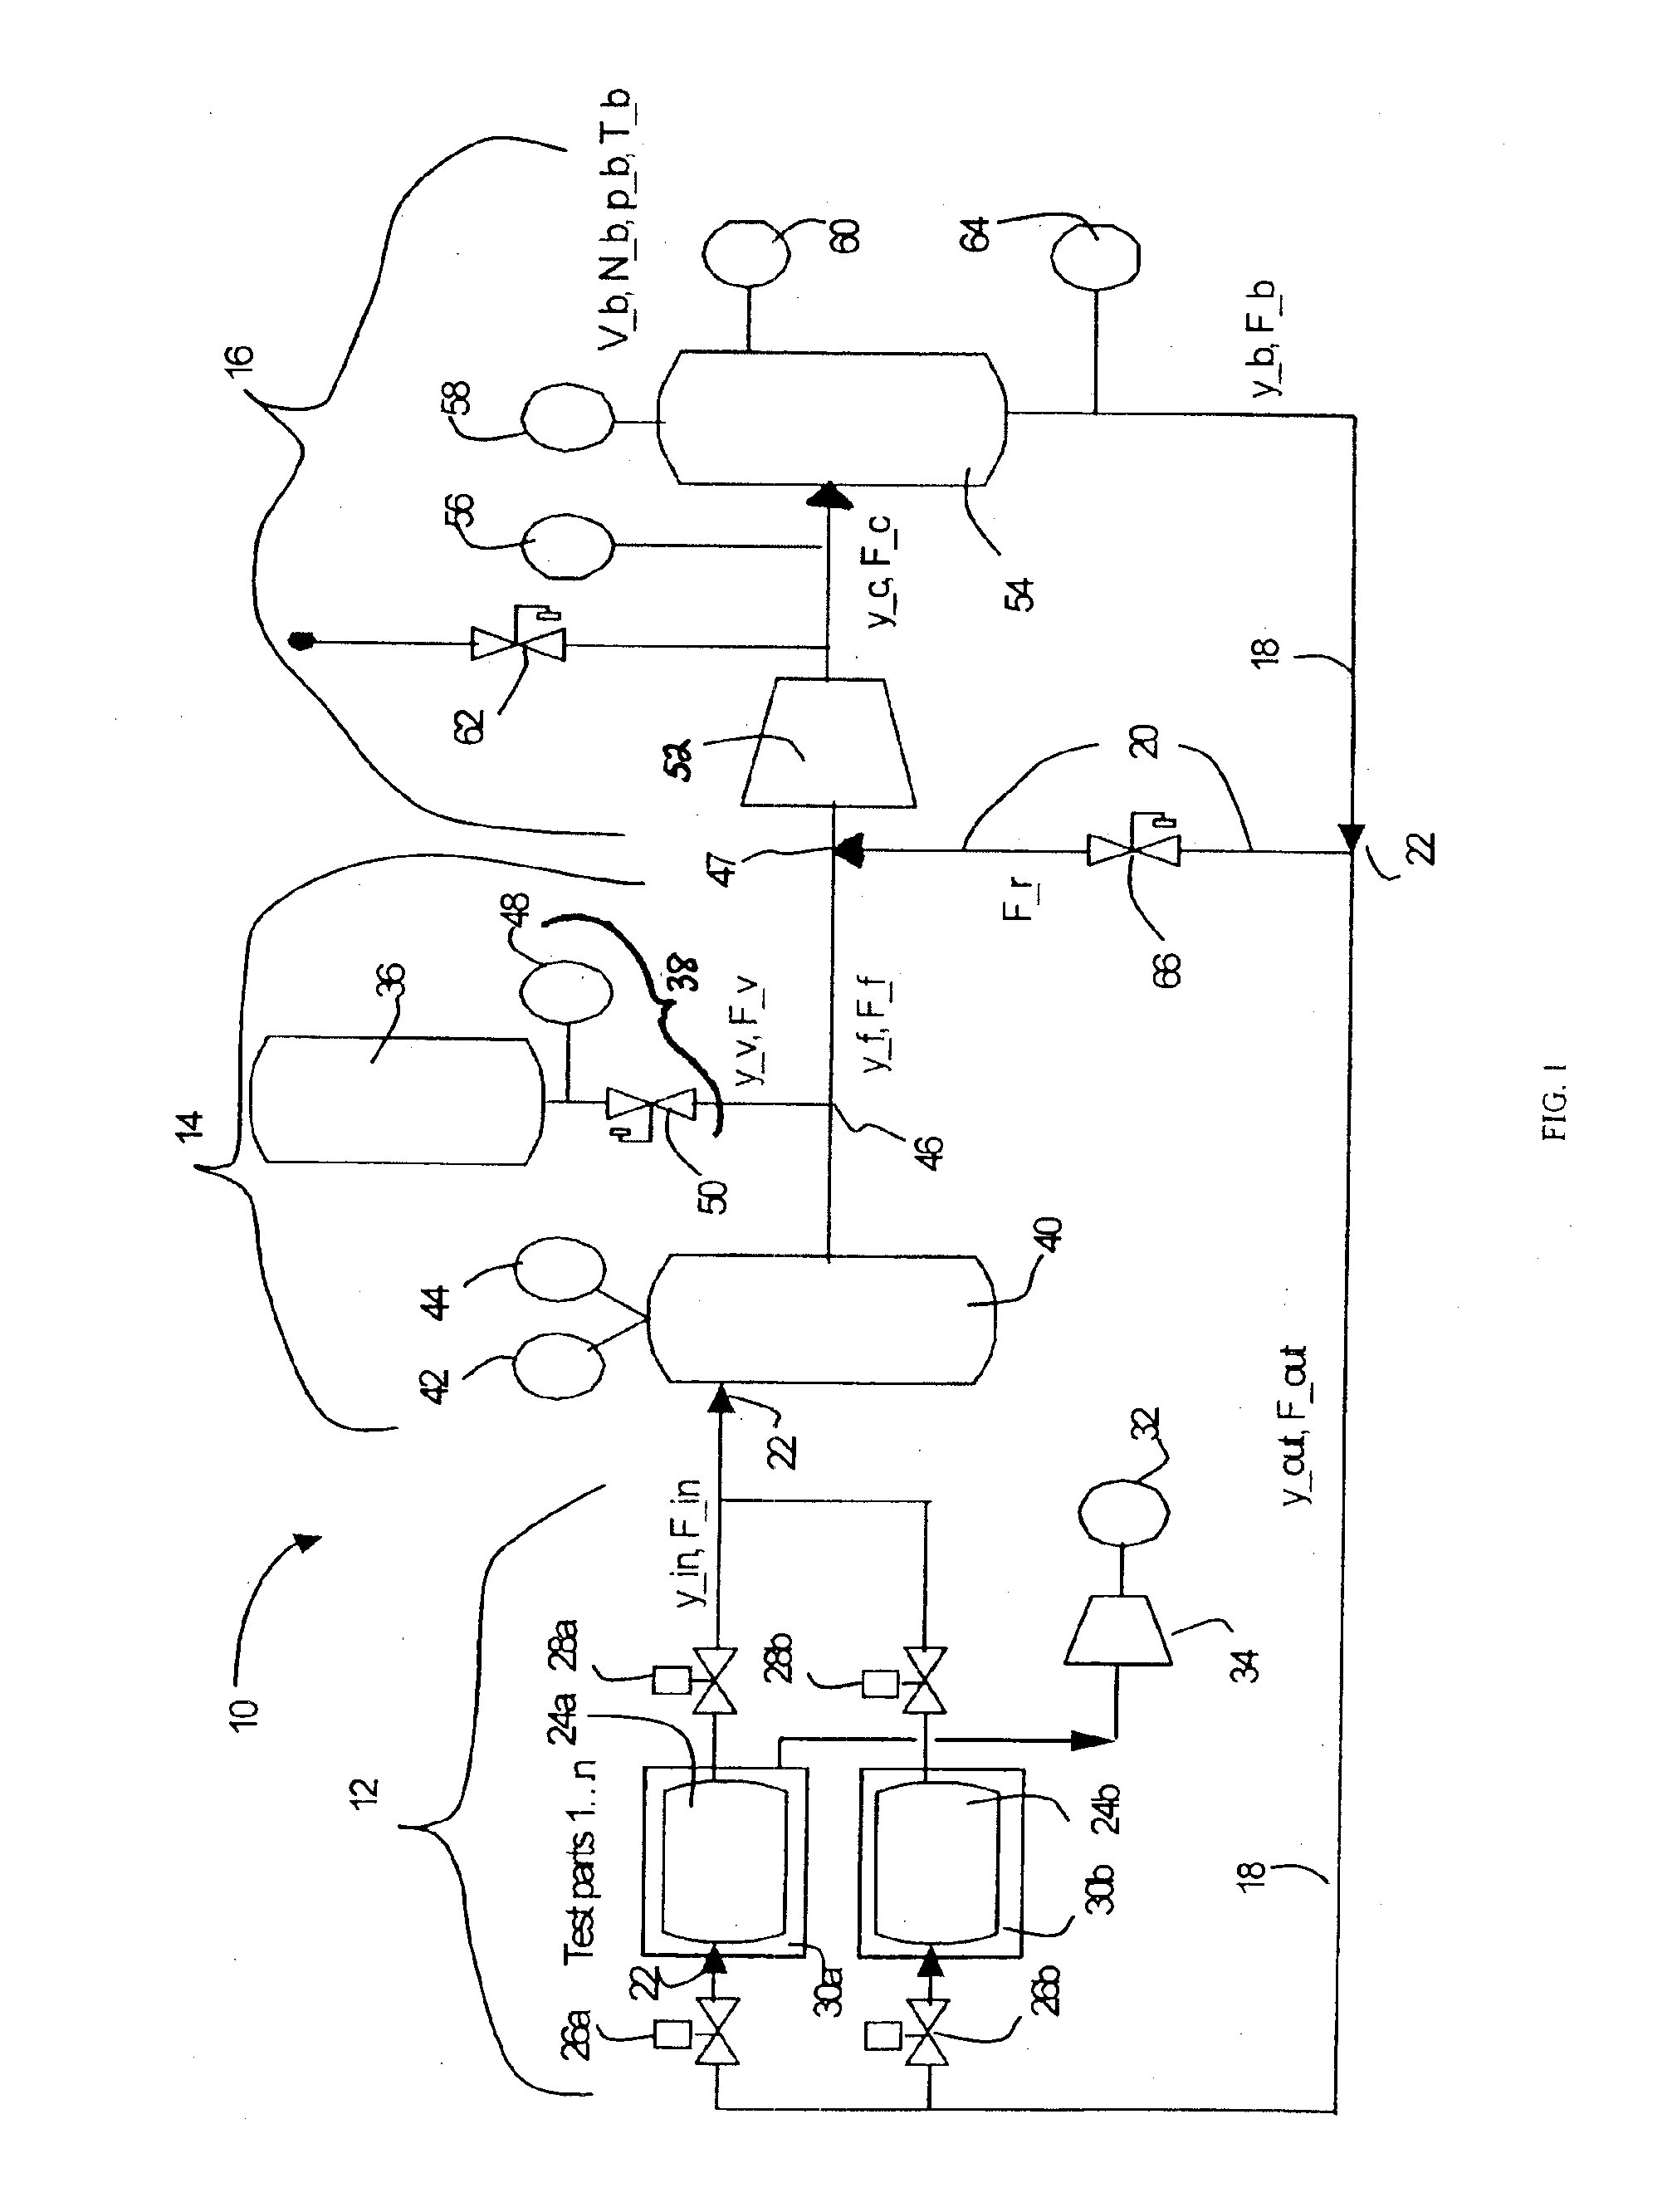 Apparatus and method for recovery and recycle of tracer gas from leak testing process with randomly varying demand